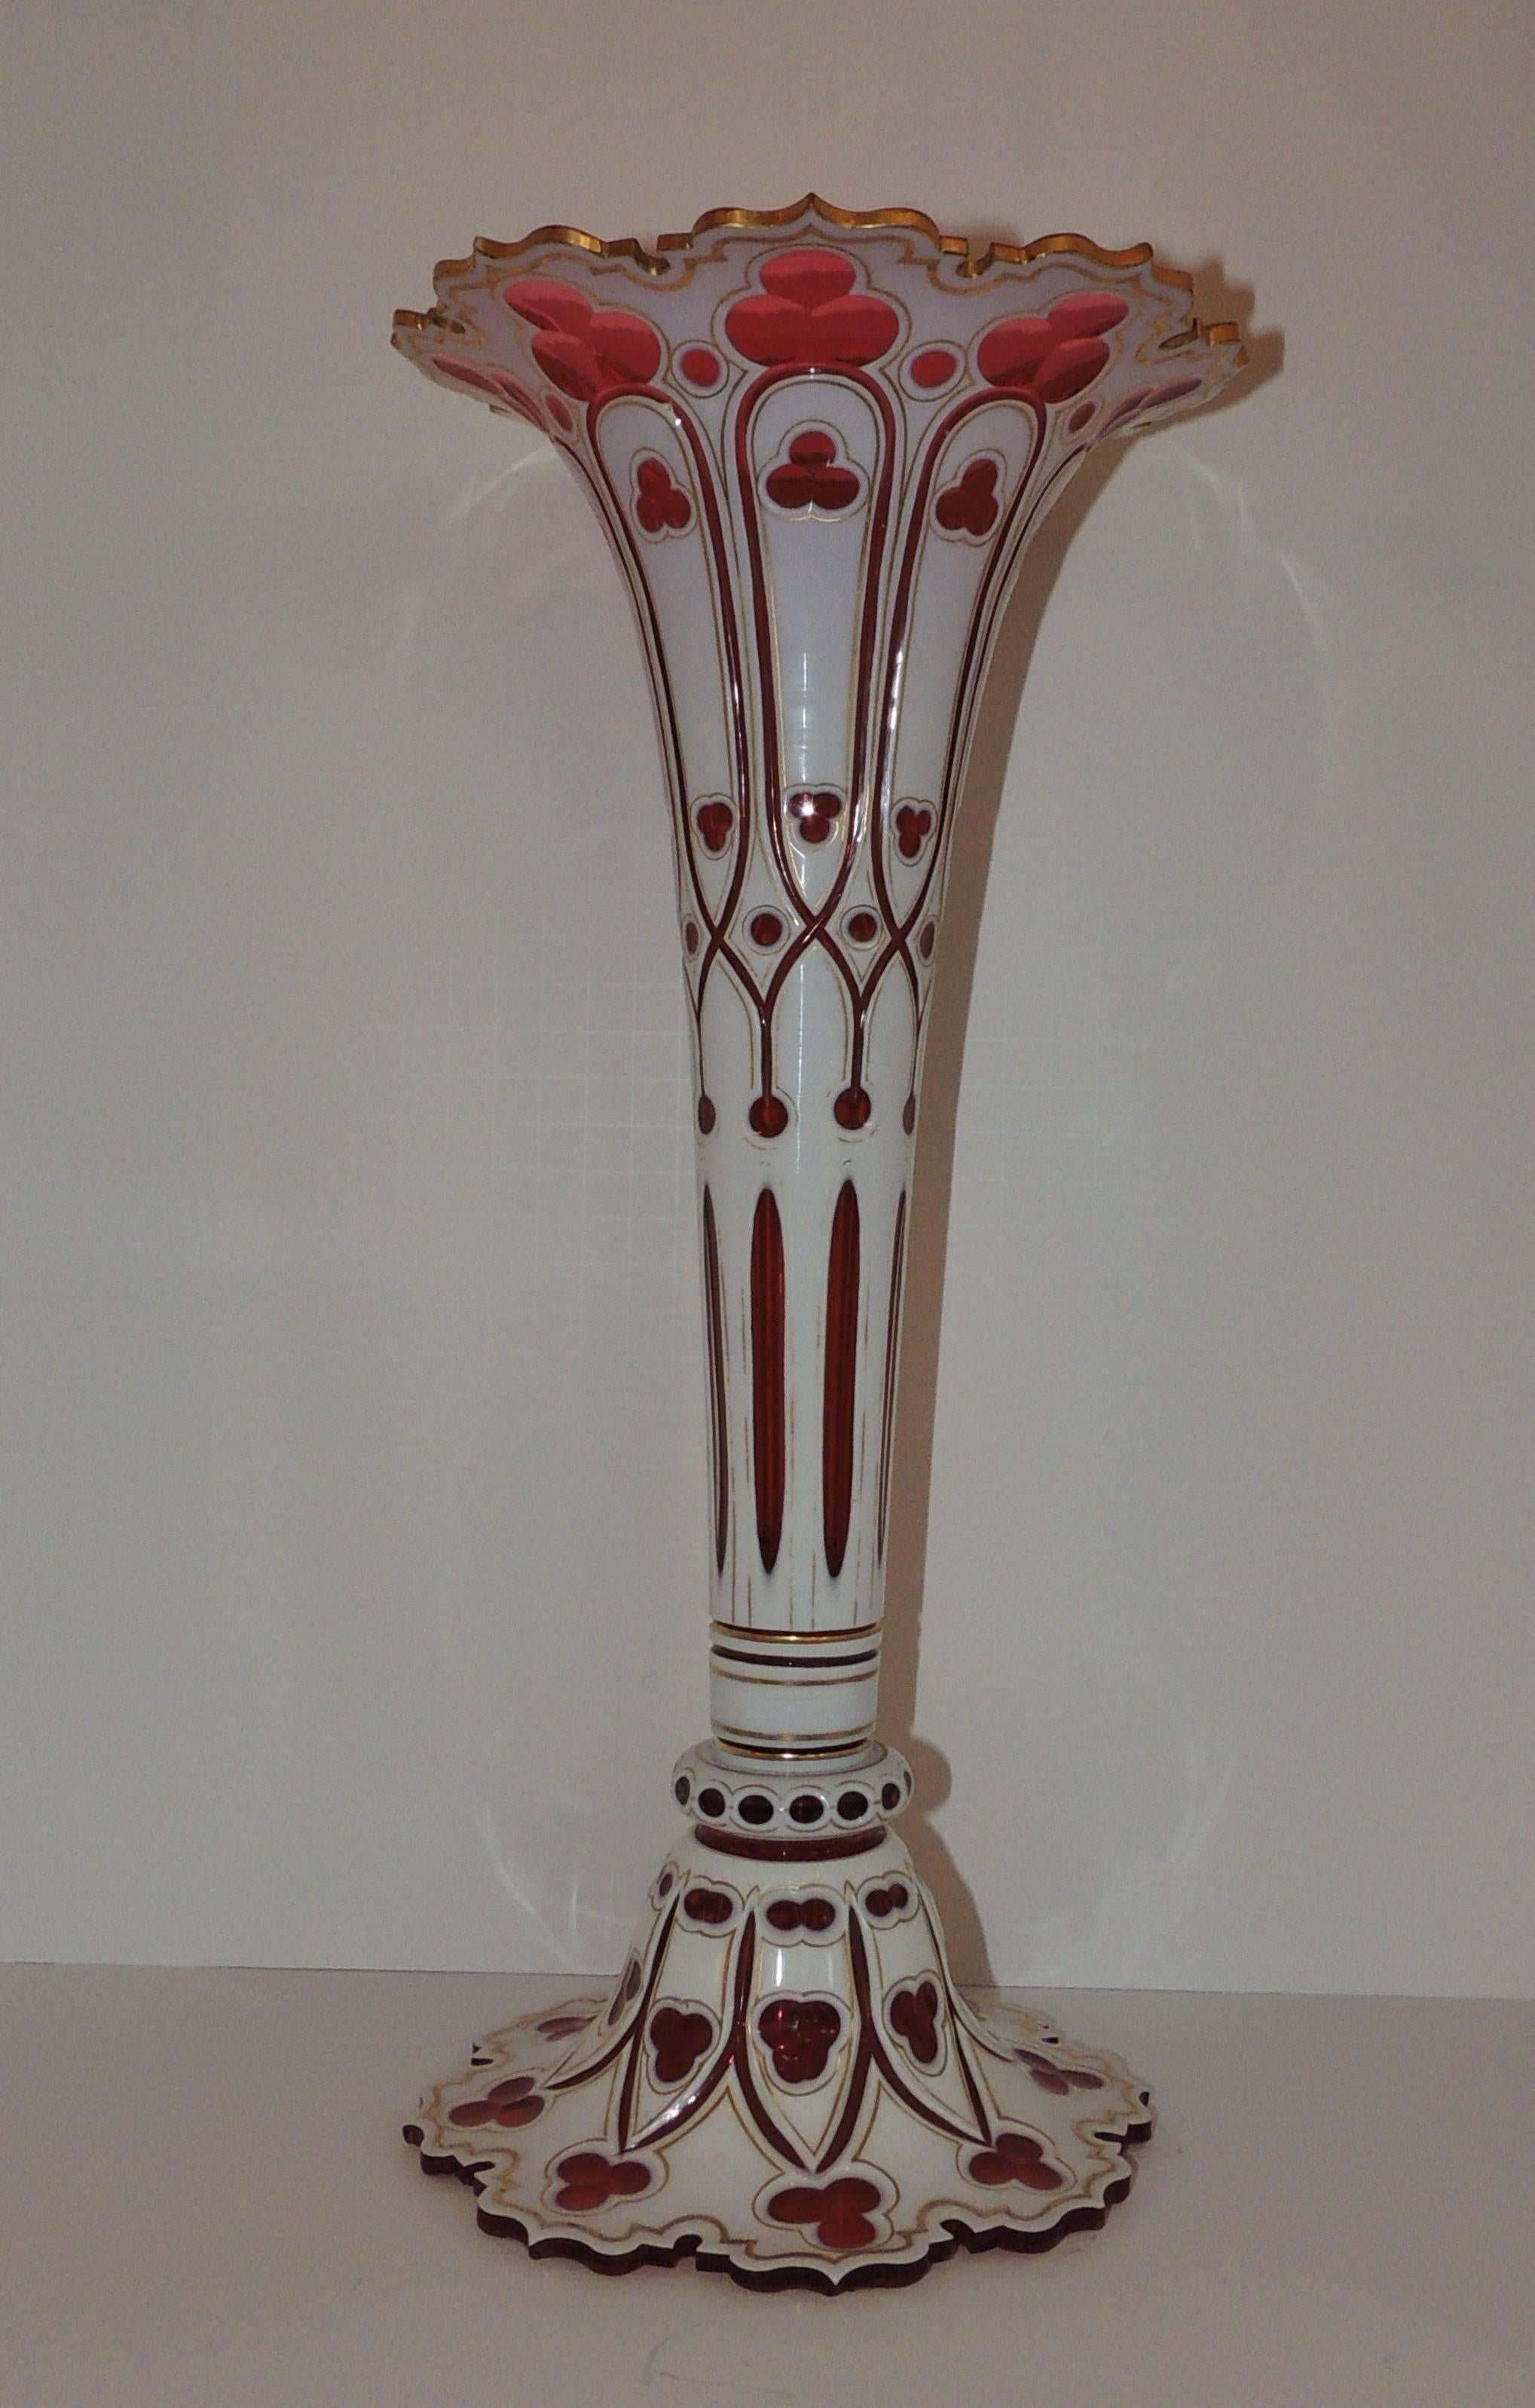 A beautiful red Bohemian cut crystal glass overlay with white and gilt trim in the clover pattern.

Measures: 16.25